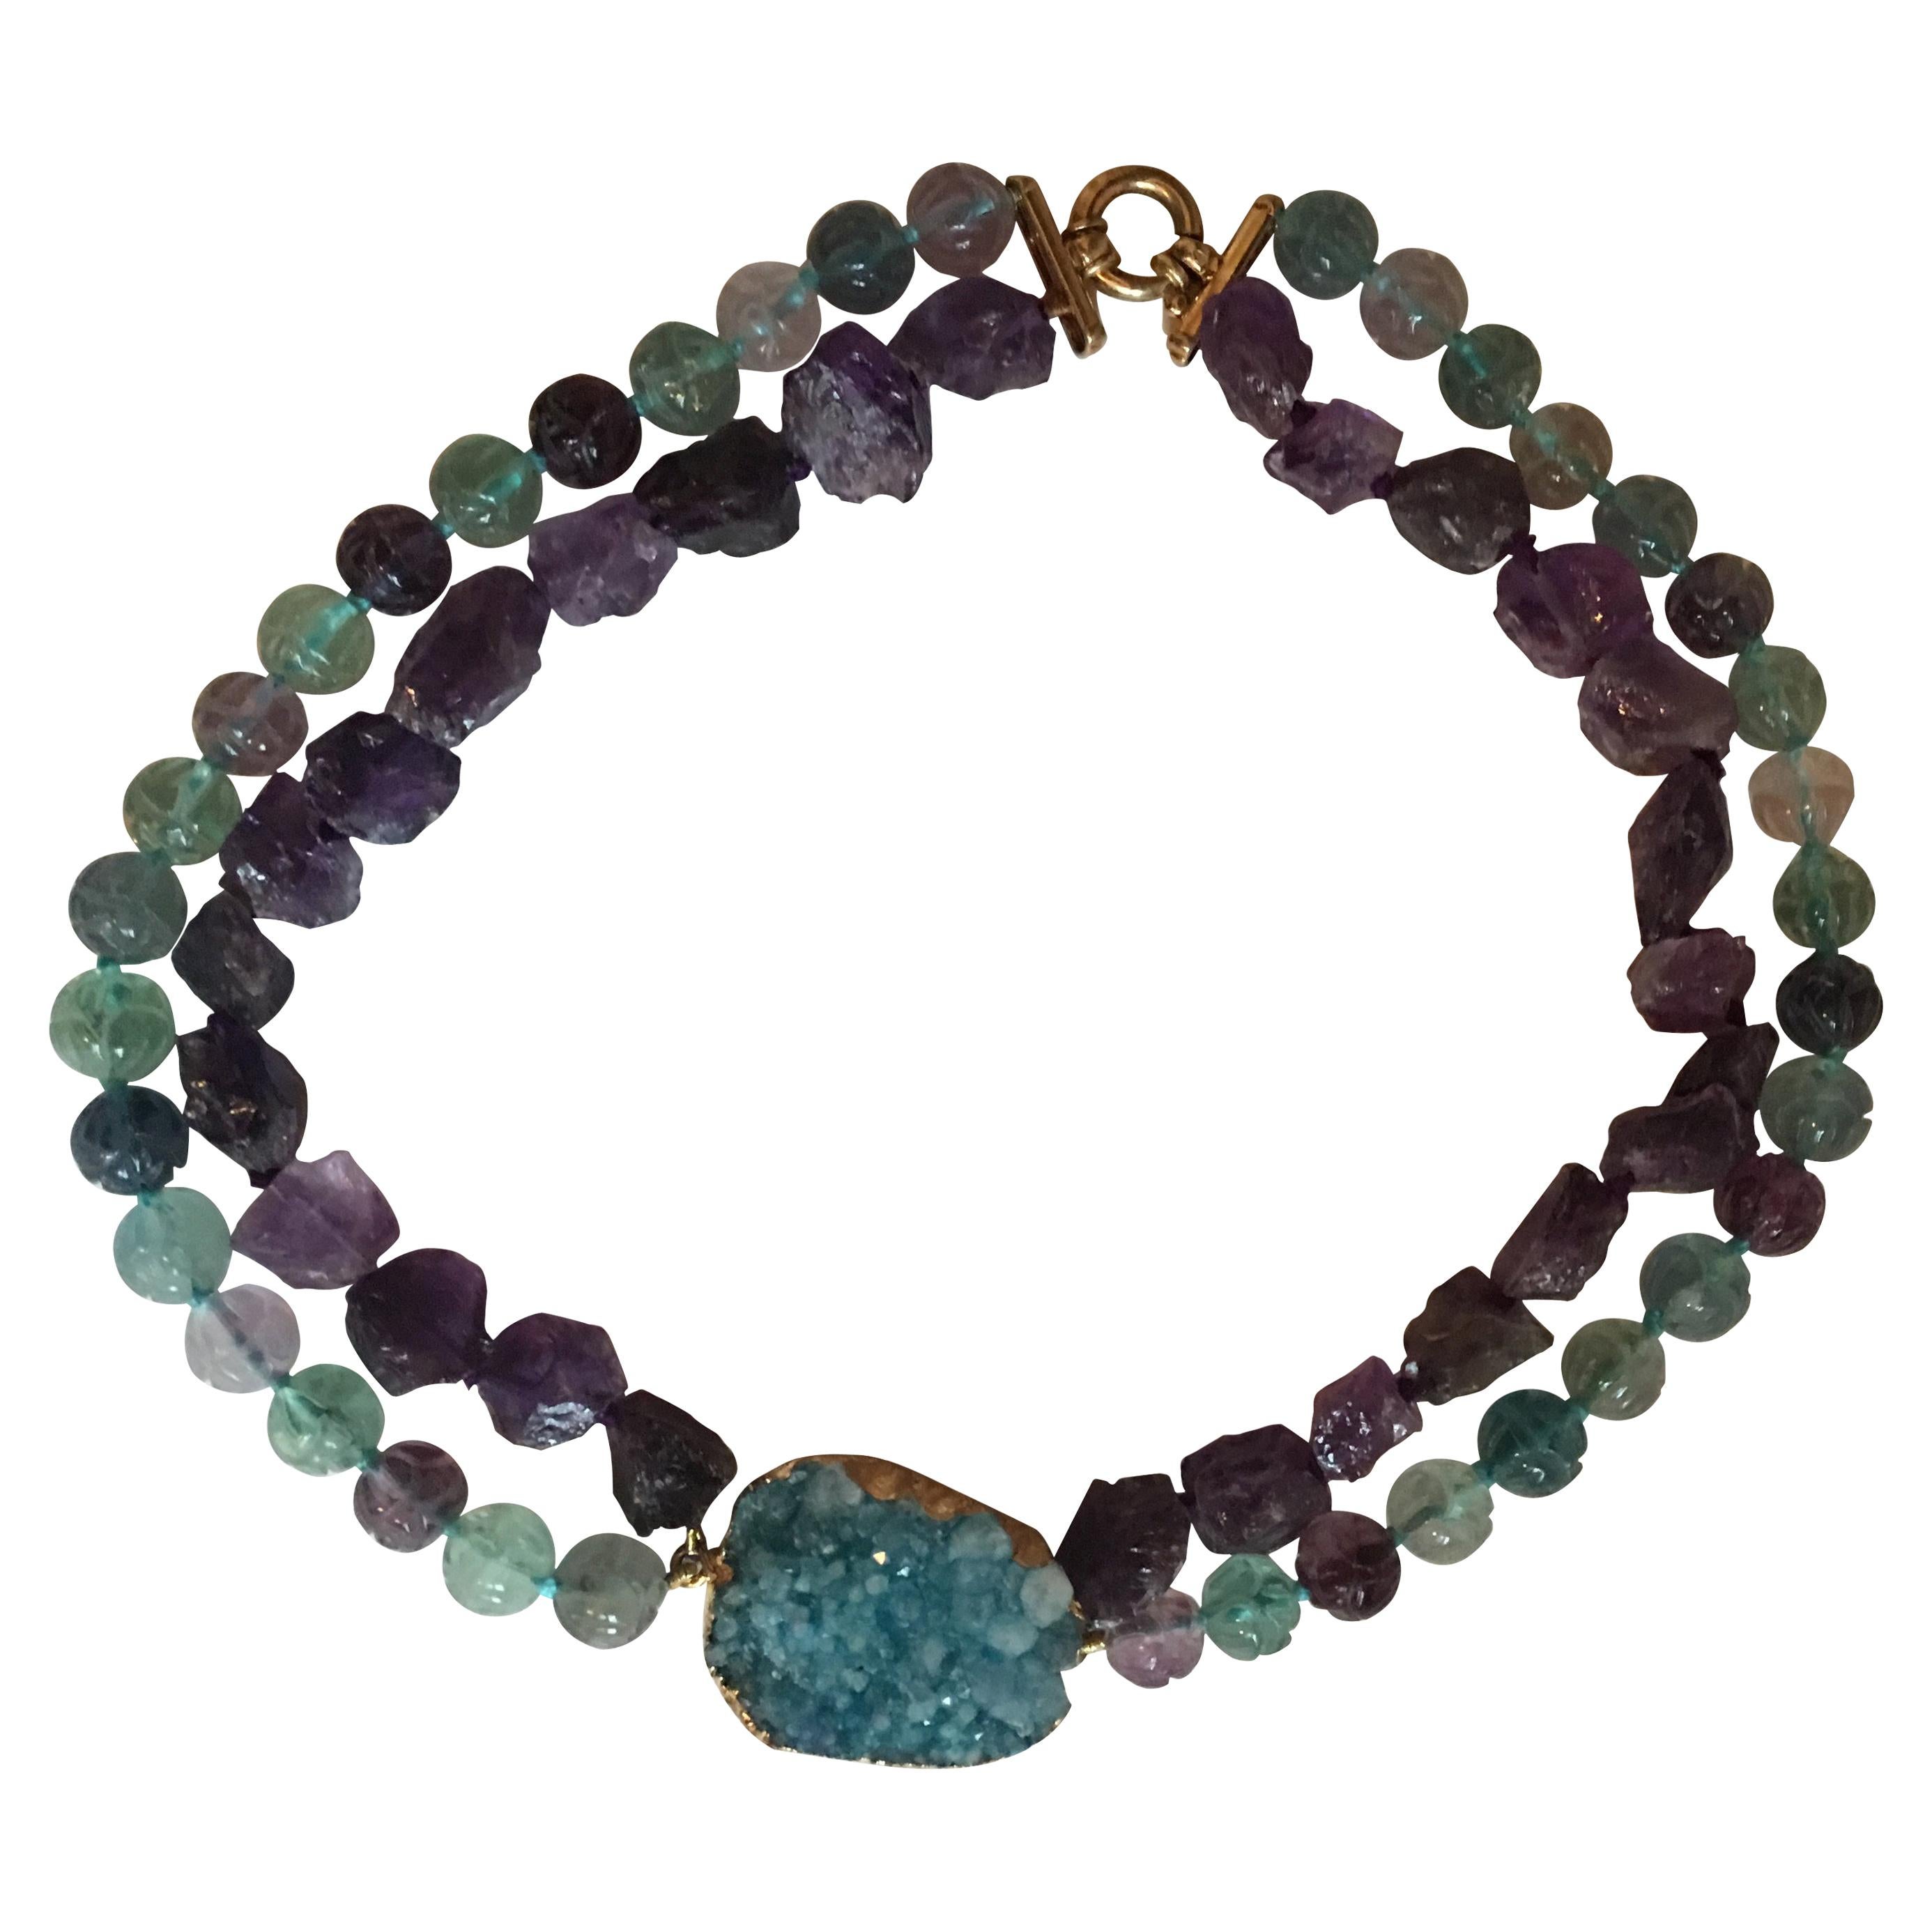 Druzy Agate Necklace Tourmaline Amethyst Gold-Plated For Sale